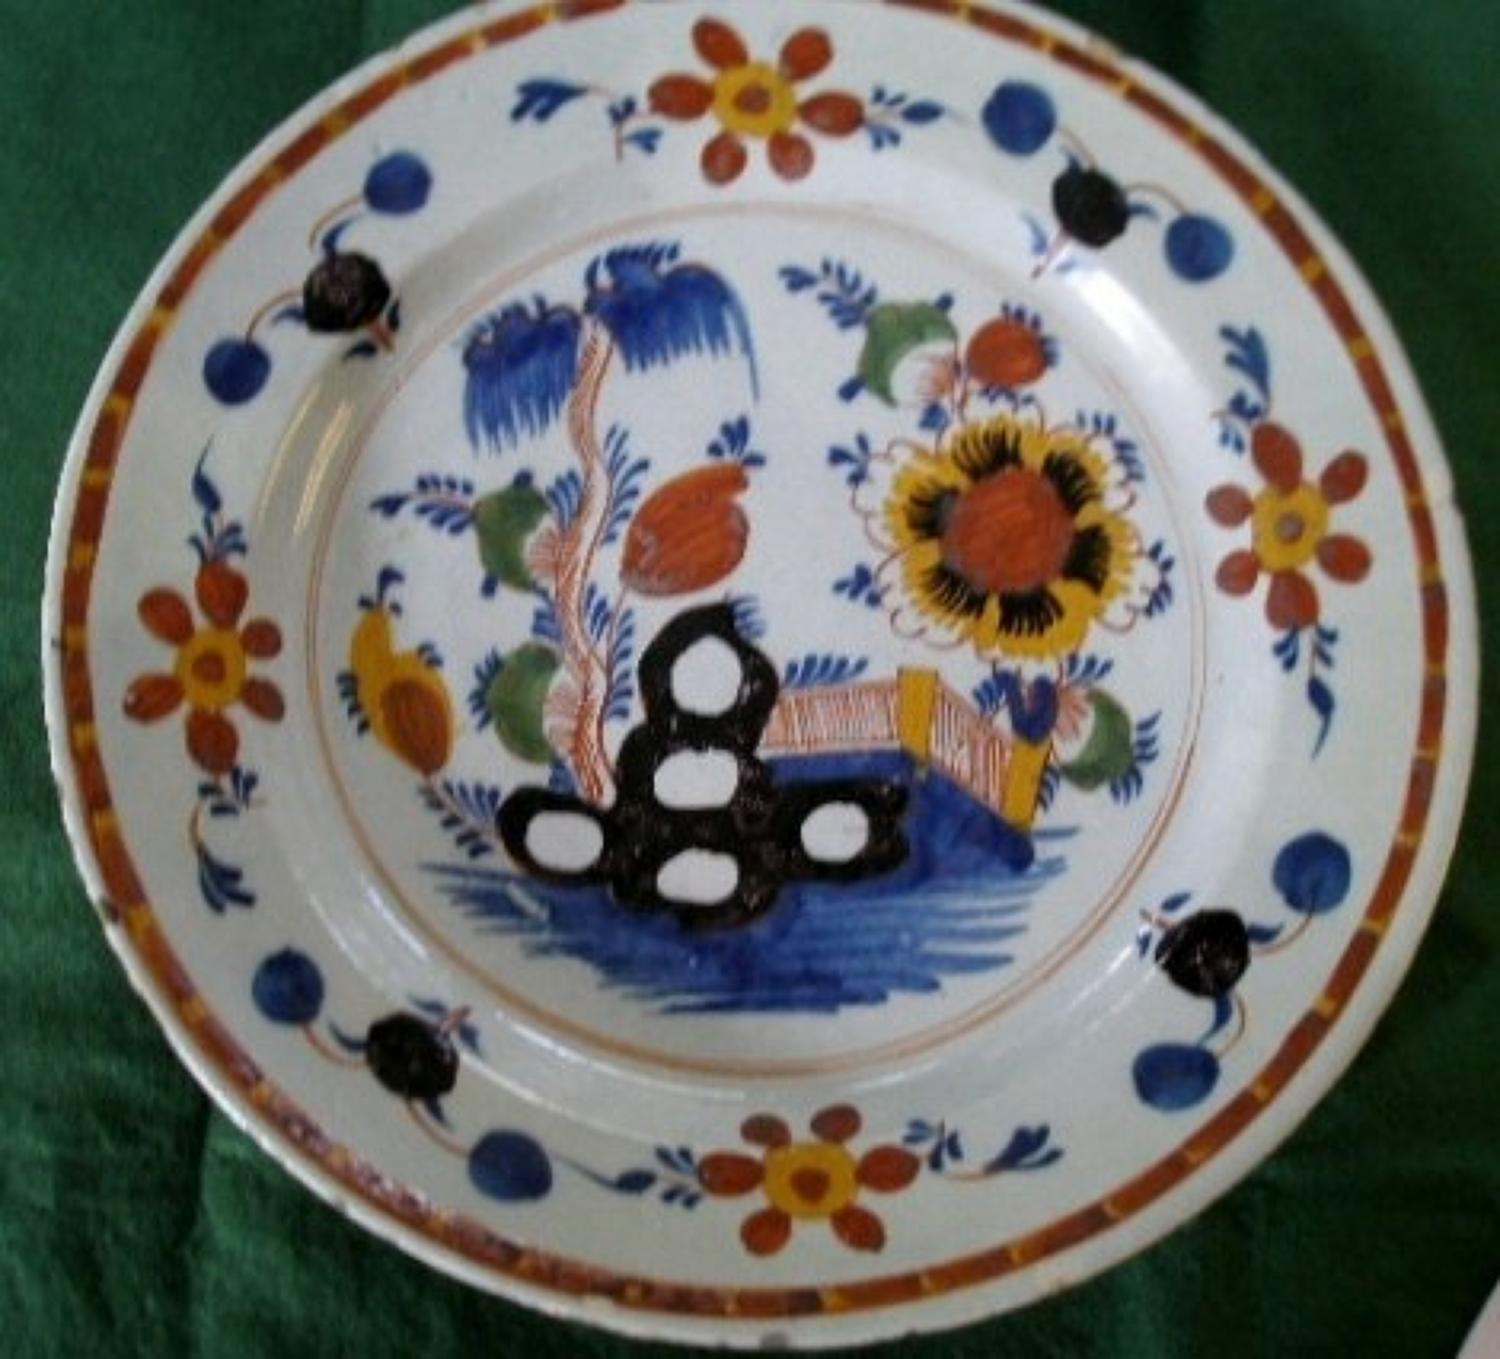 Early 18th century Dutch delft charger